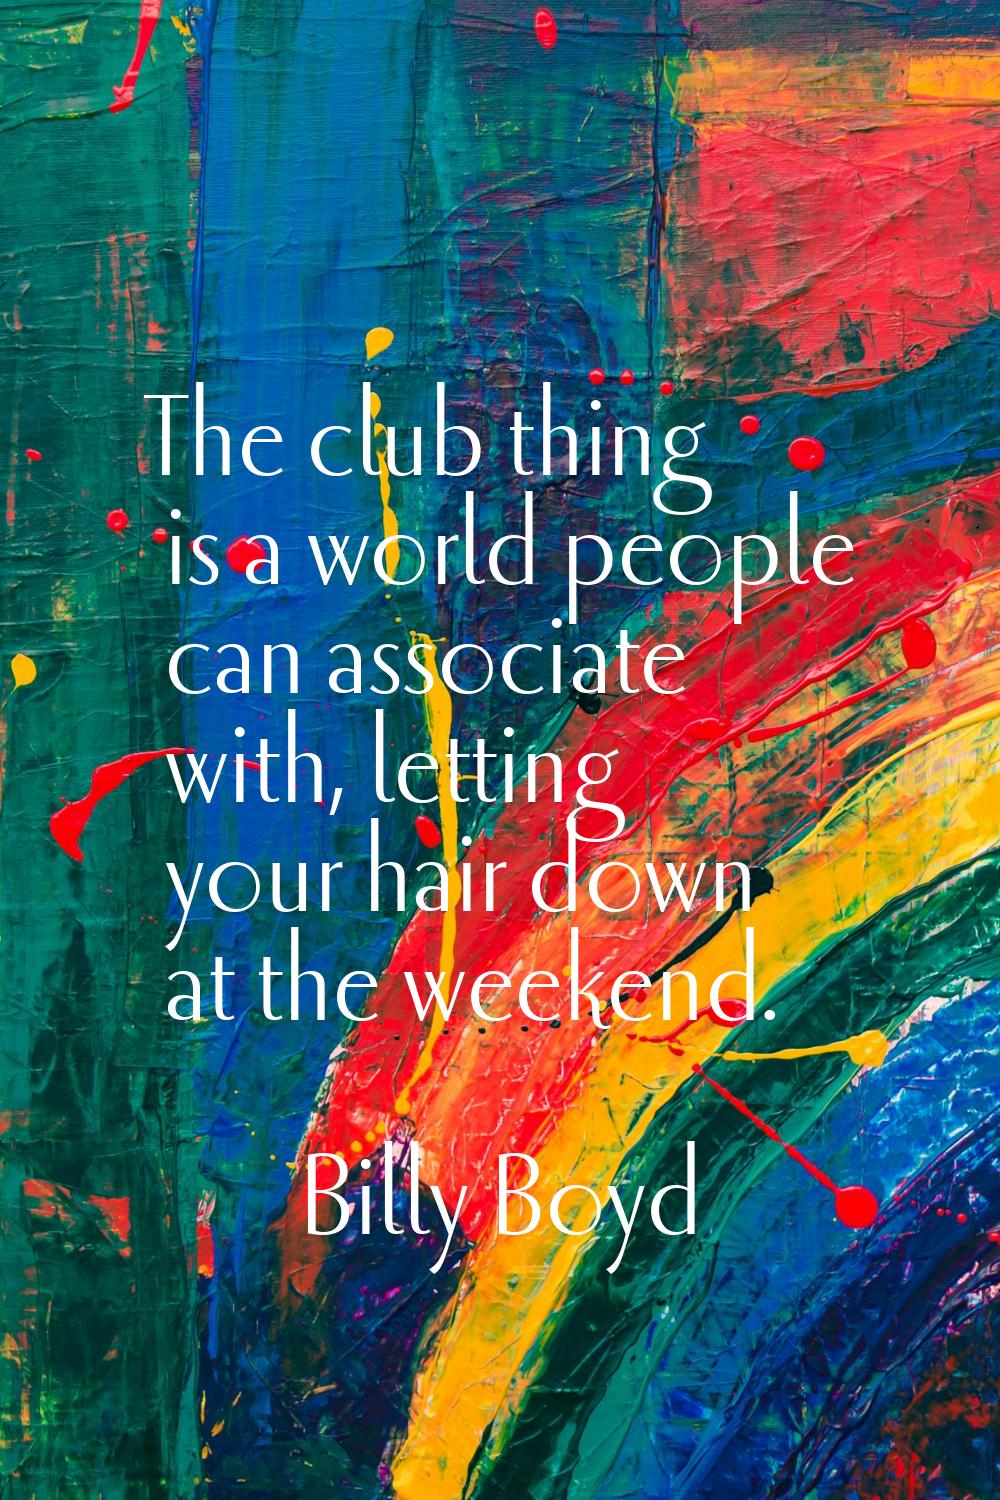 The club thing is a world people can associate with, letting your hair down at the weekend.